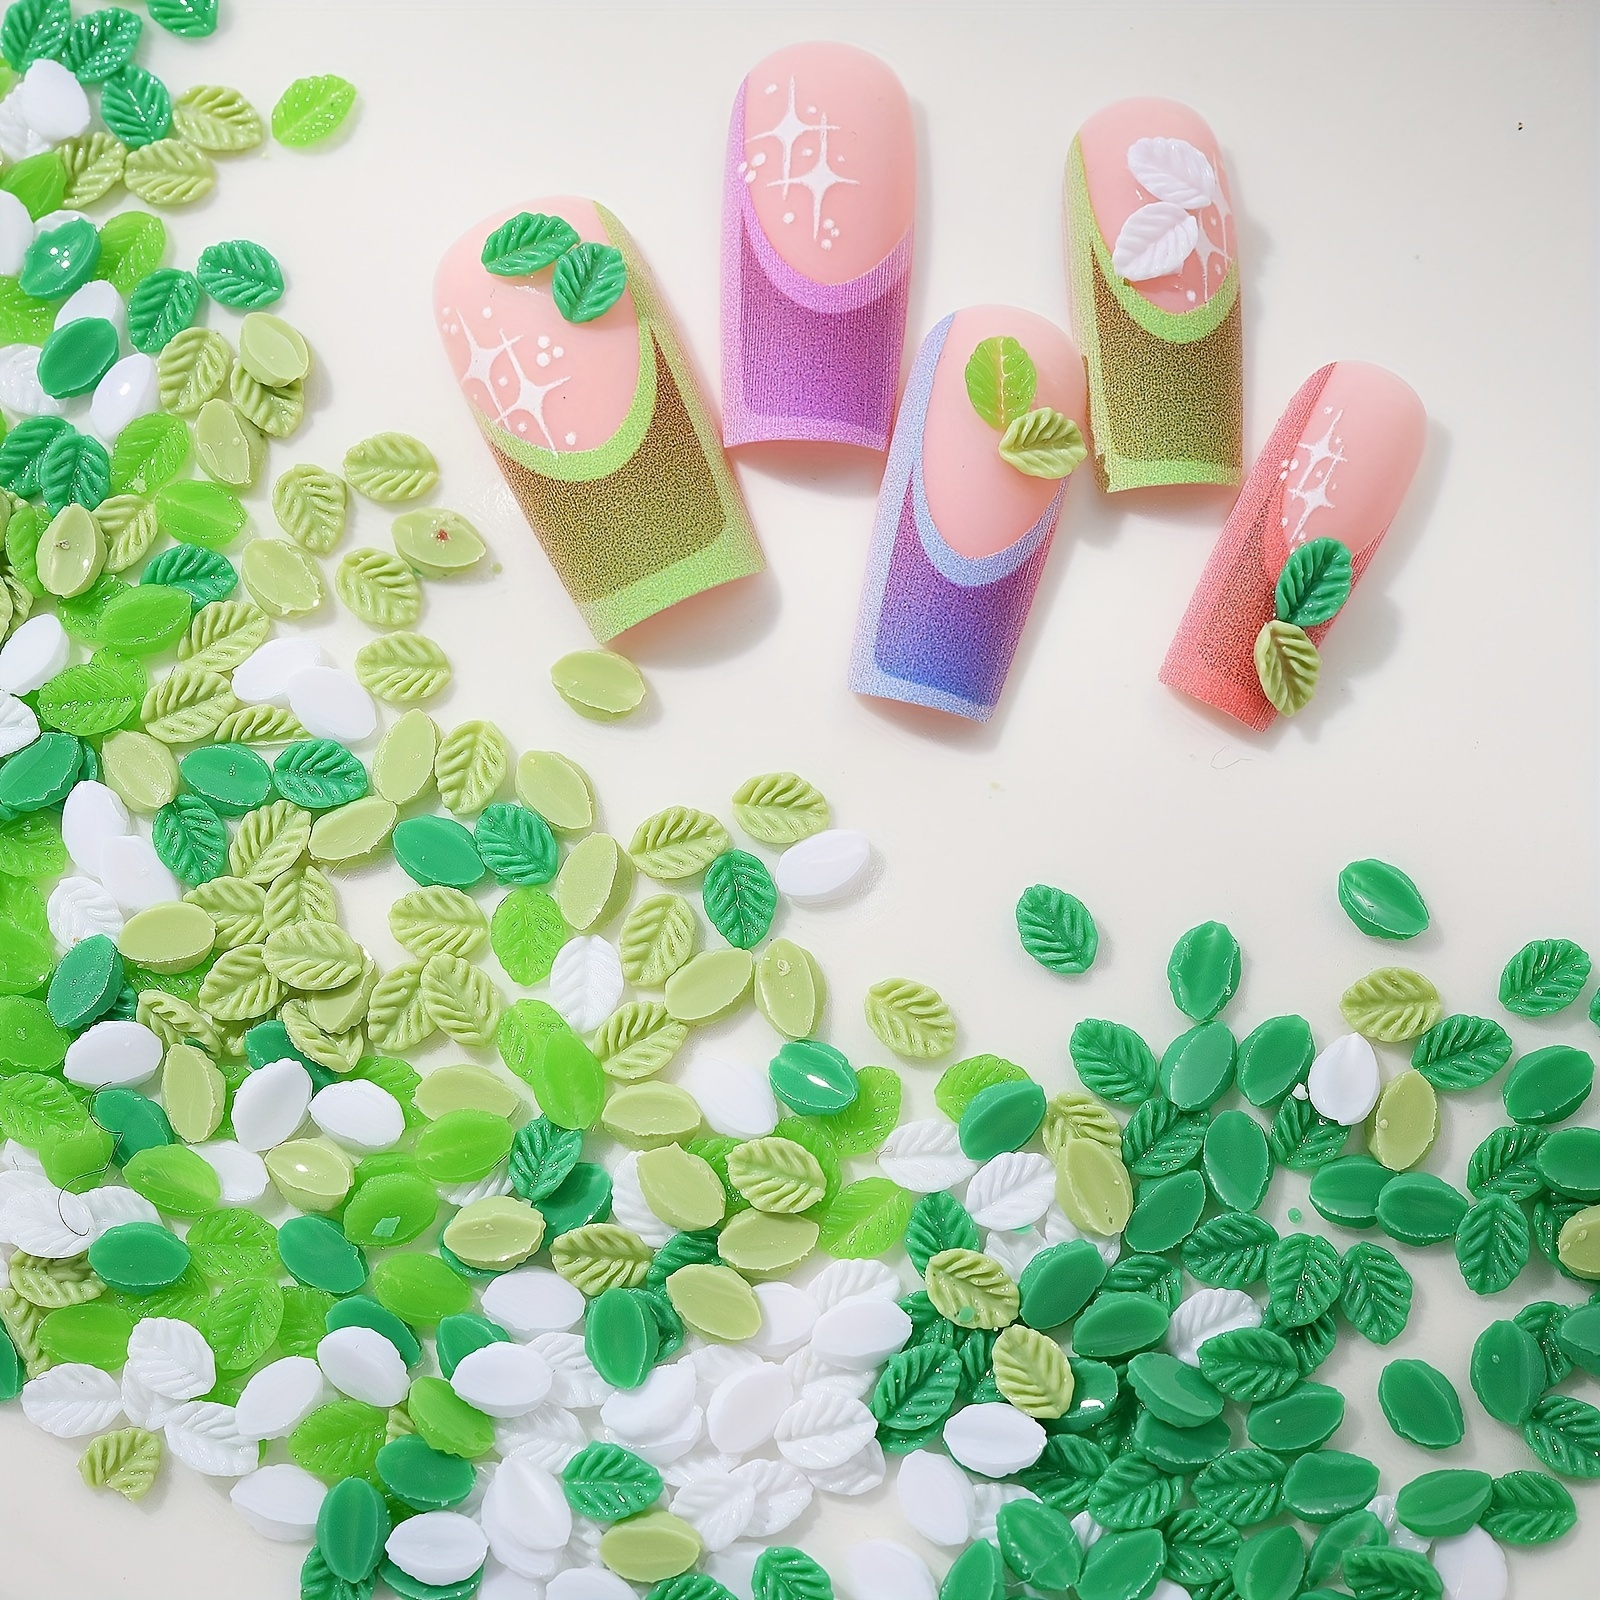 

100pcs Mixed Colors Nail Art Decorations, Spring Summer Green Mini Leaves Nail Charms, 3d Faux Leaf Design, Flower Compatible Manicure Accessories